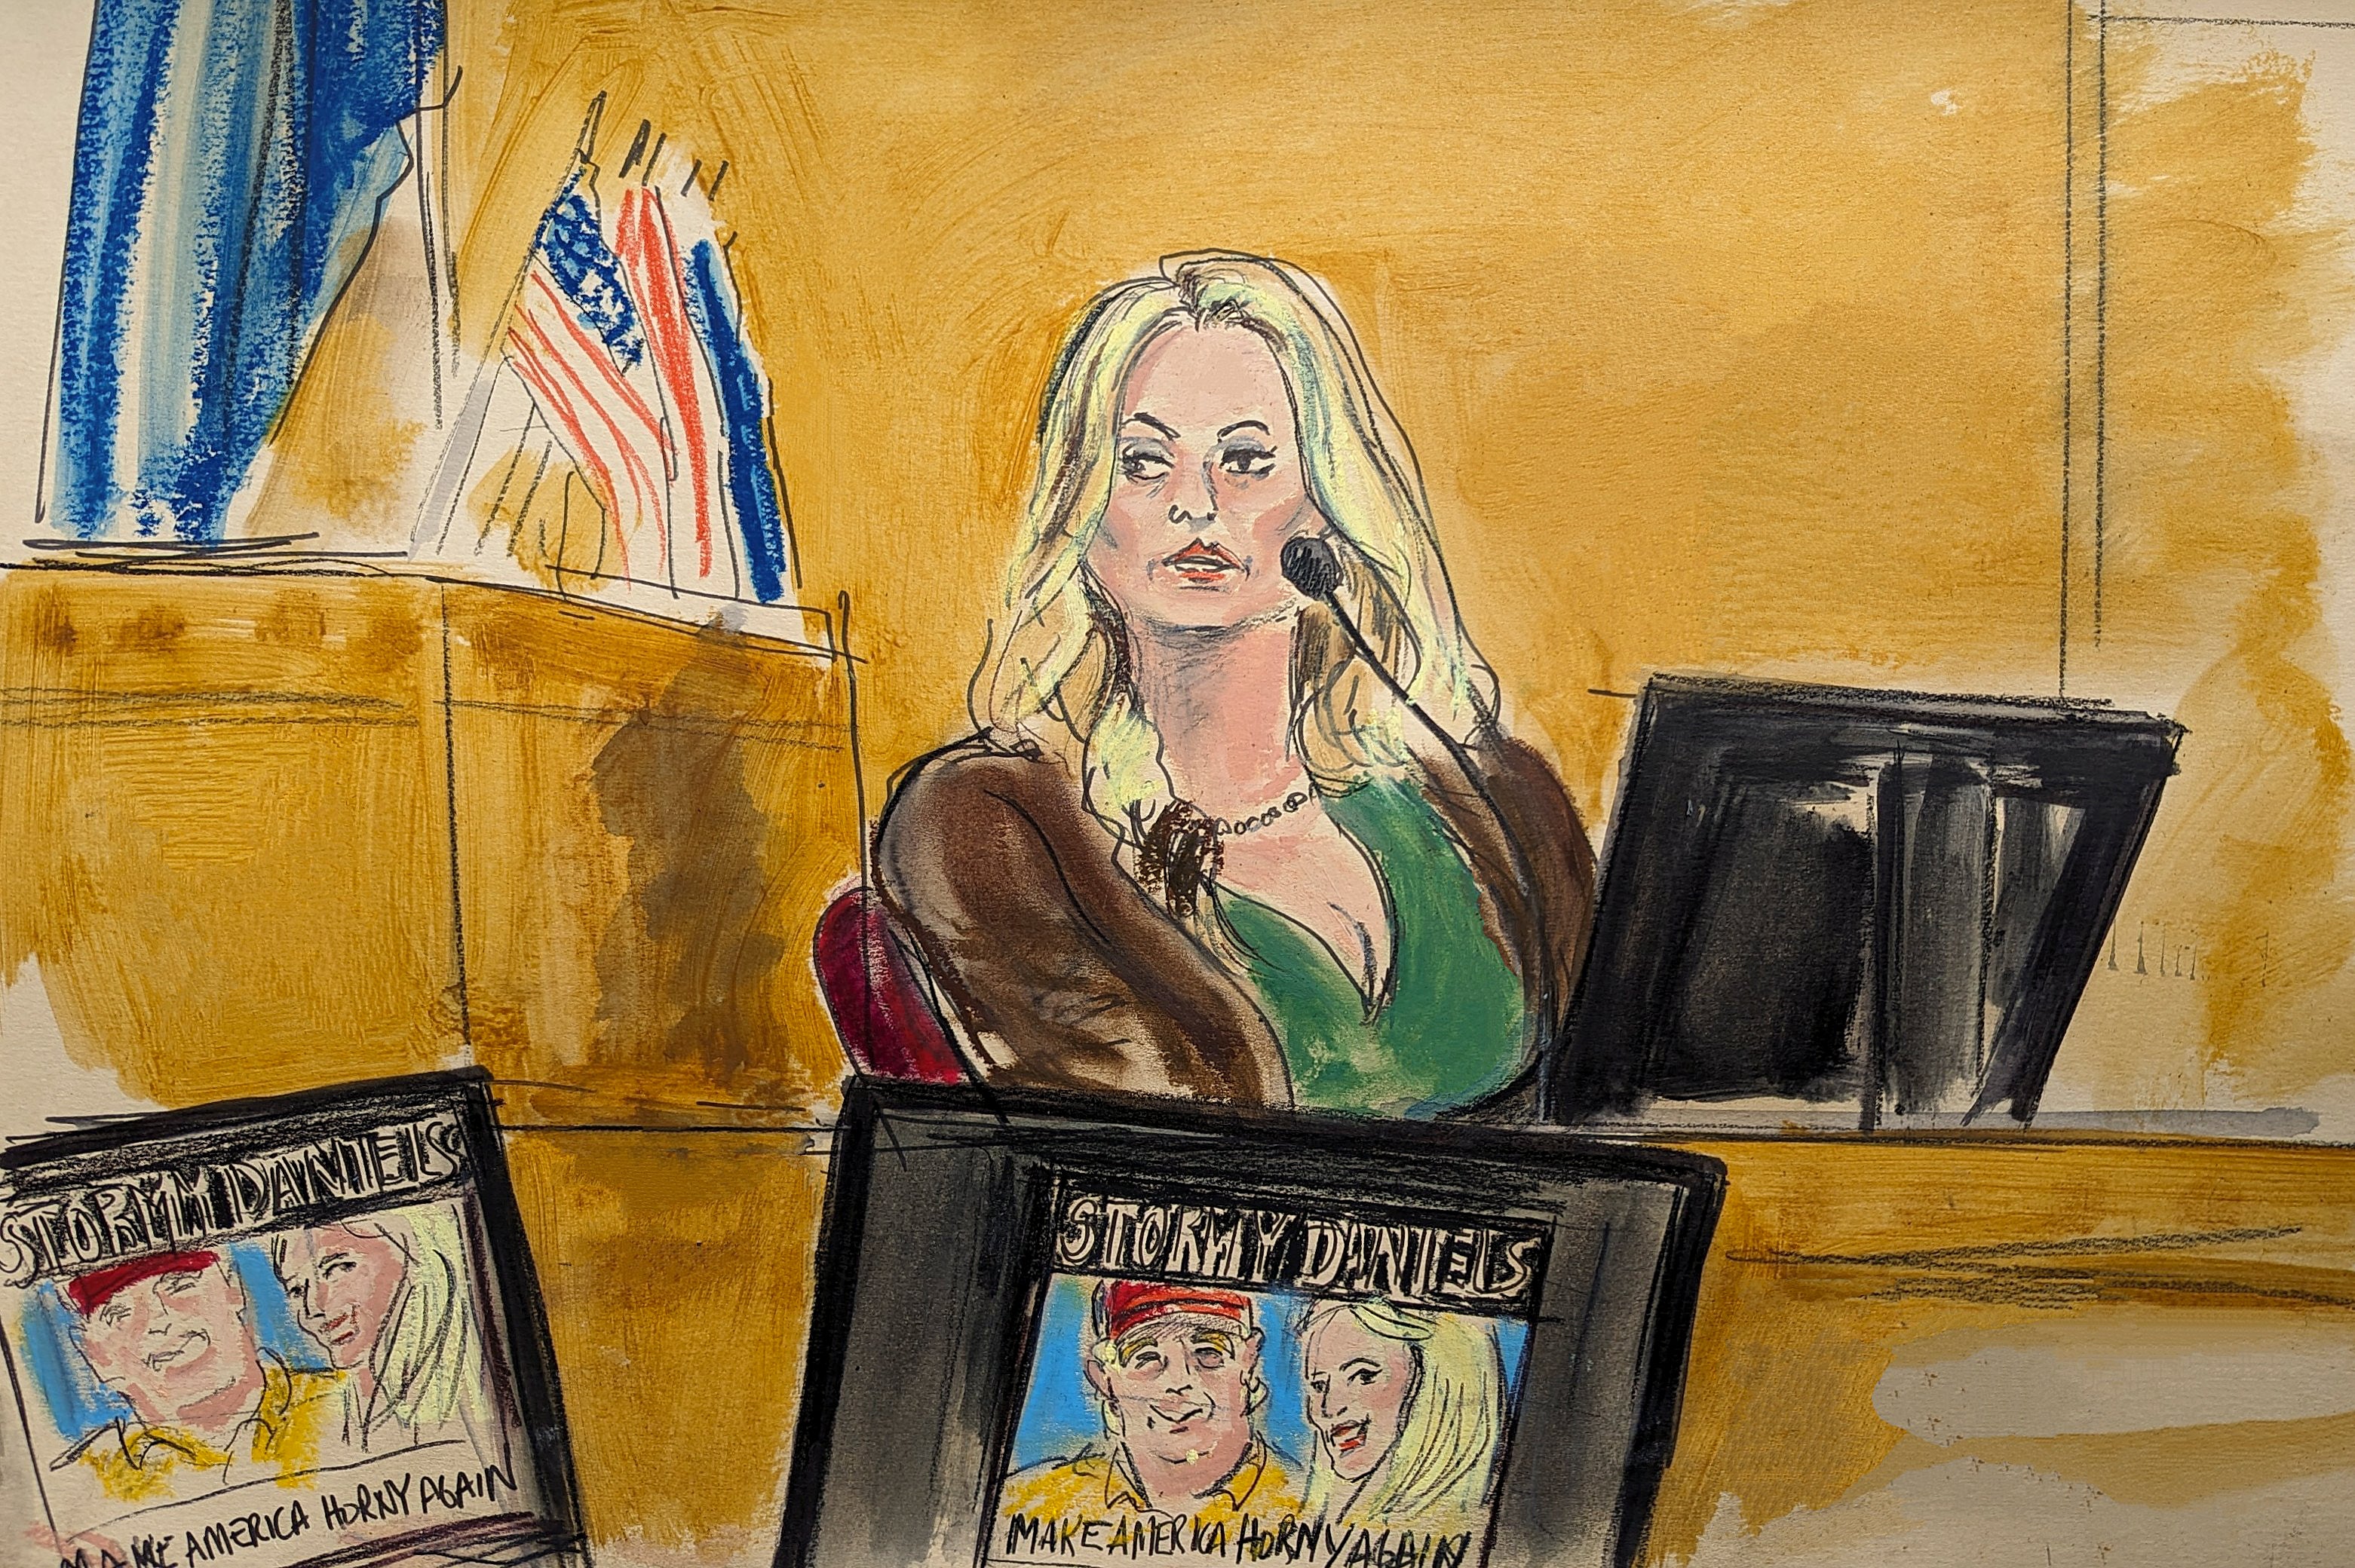 Adult film star Stormy Daniels in a portrait capturing her sly self-assurance